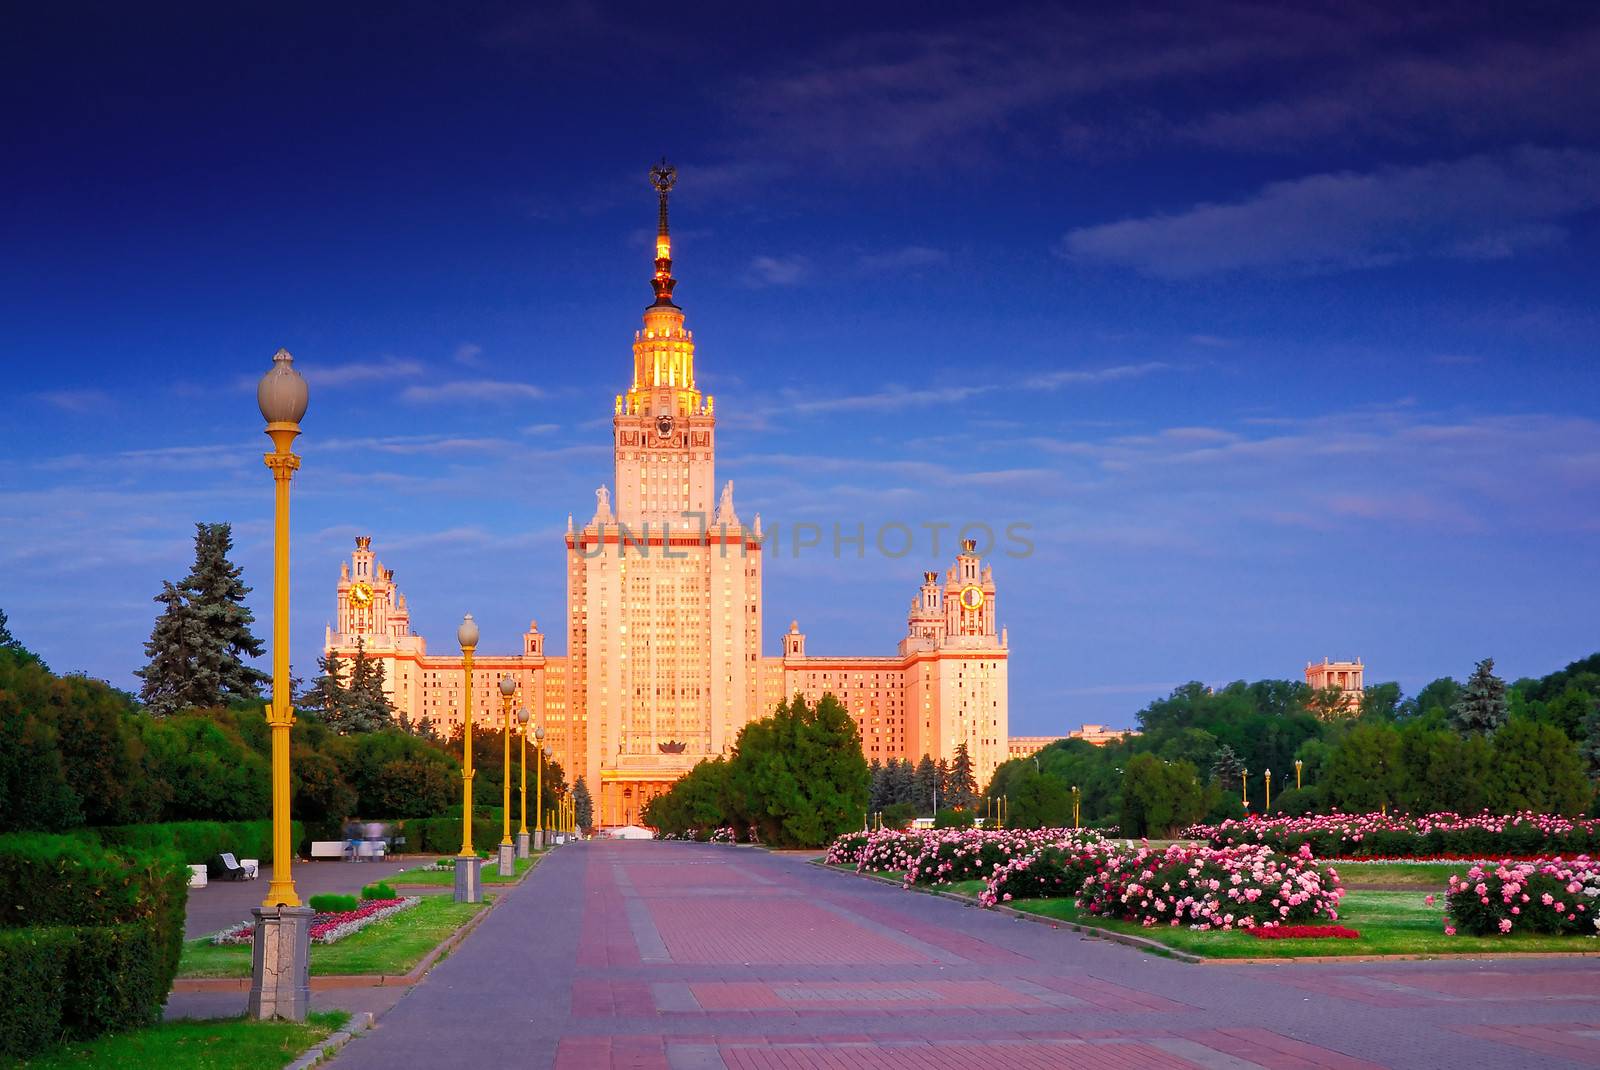 Moscow state university. Moscow. by kosmsos111